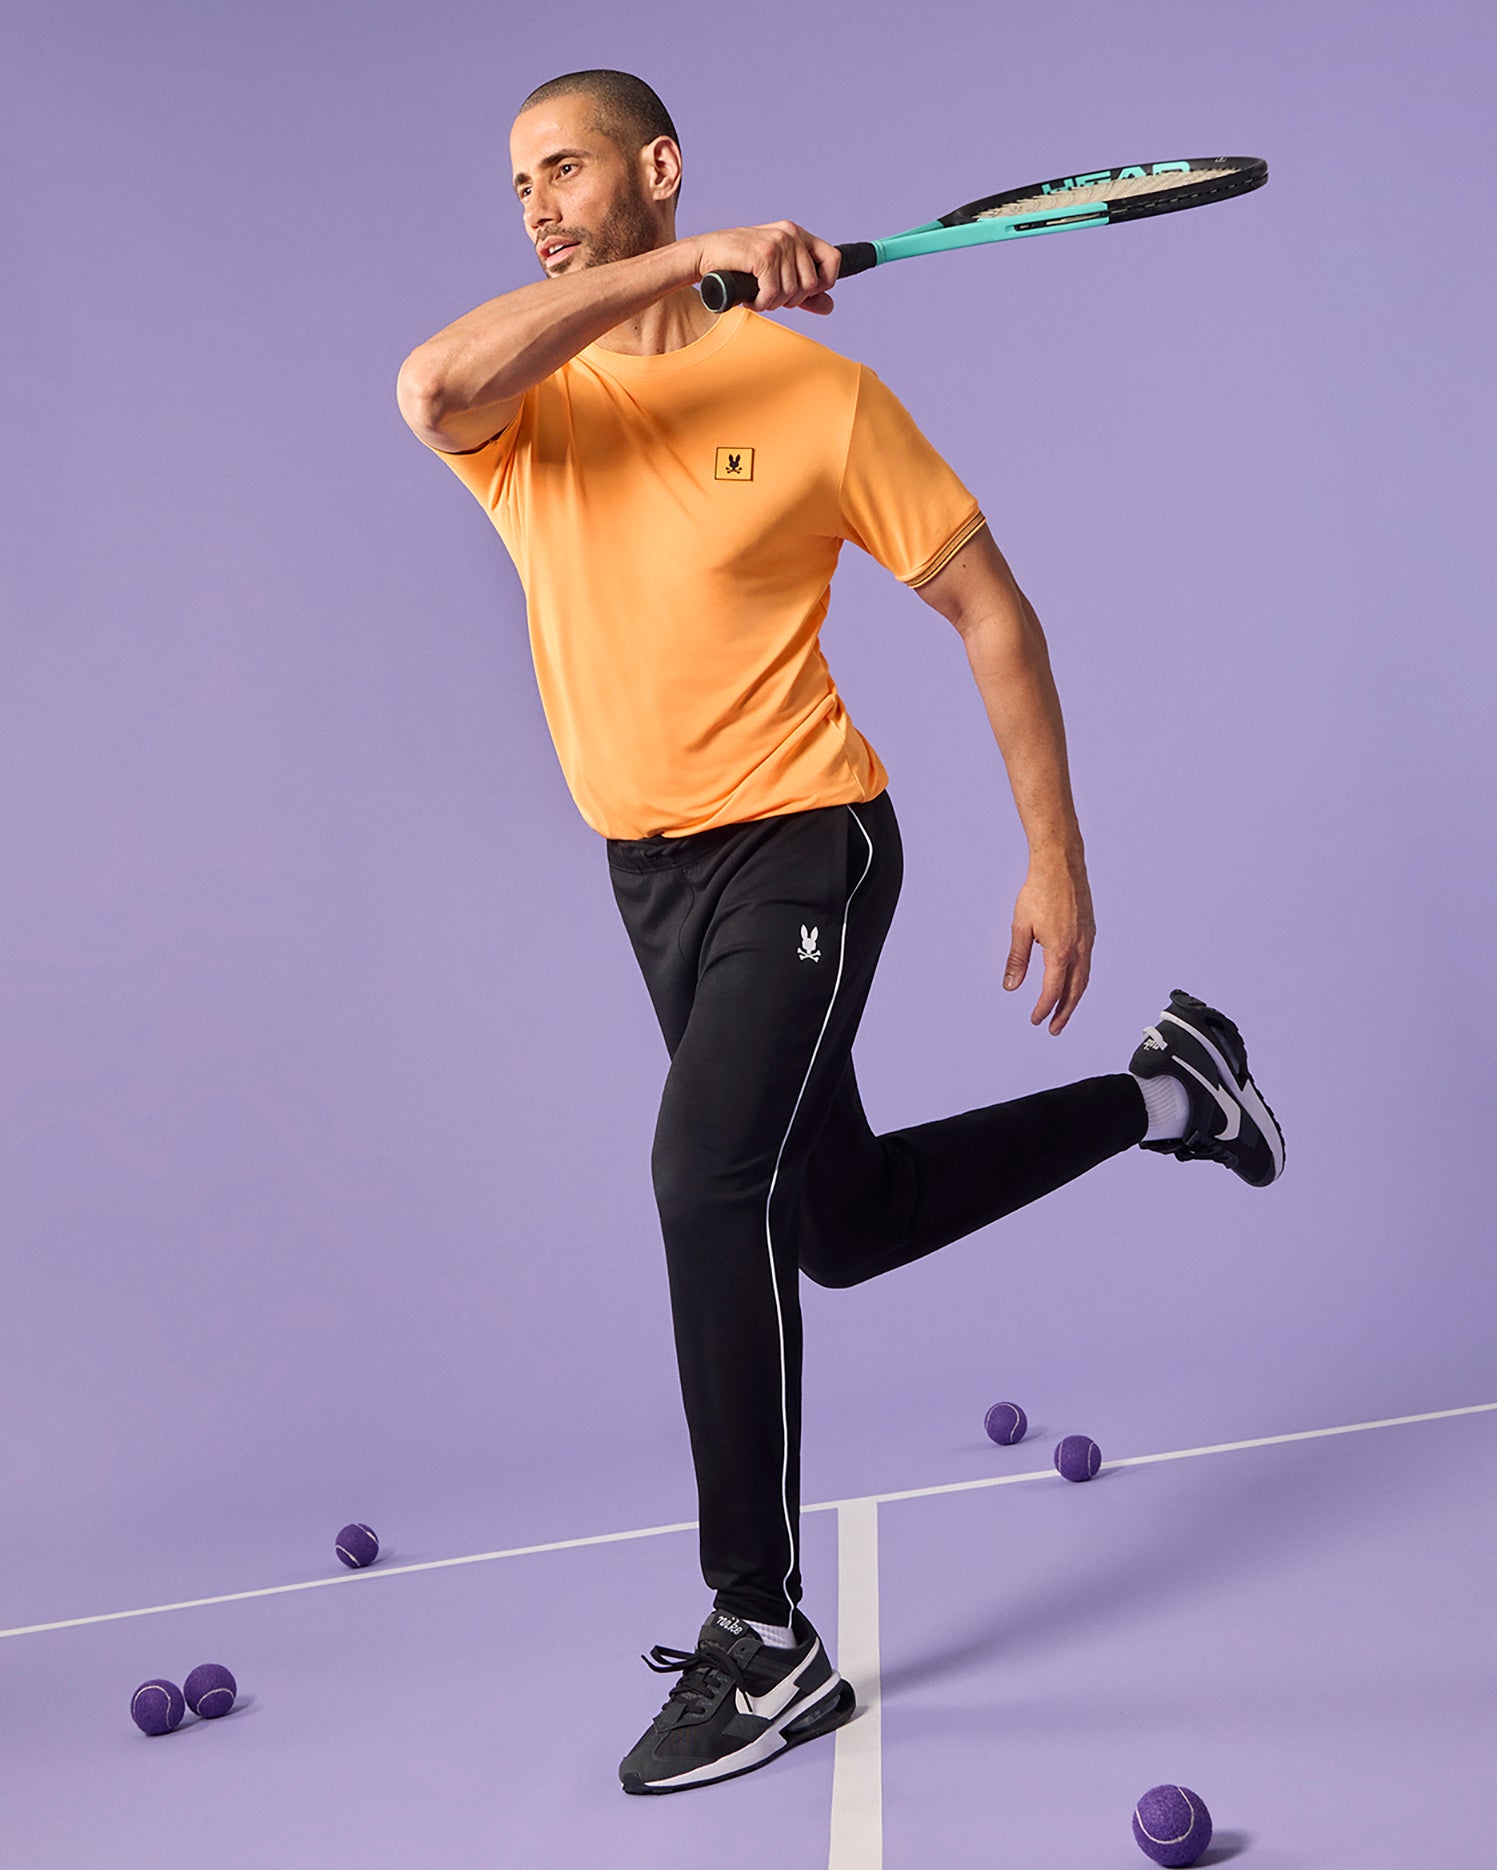 A person wearing a Psycho Bunny MENS TARRYTOWN SPORT TEE - B6U287B200 in breathable stretch jersey and black pants plays tennis on a lavender court. They are in a mid-swing position with their left foot off the ground. Several tennis balls are scattered on the court, and the person's moisture-wicking shirt keeps them cool as they hold a racket in their right hand.